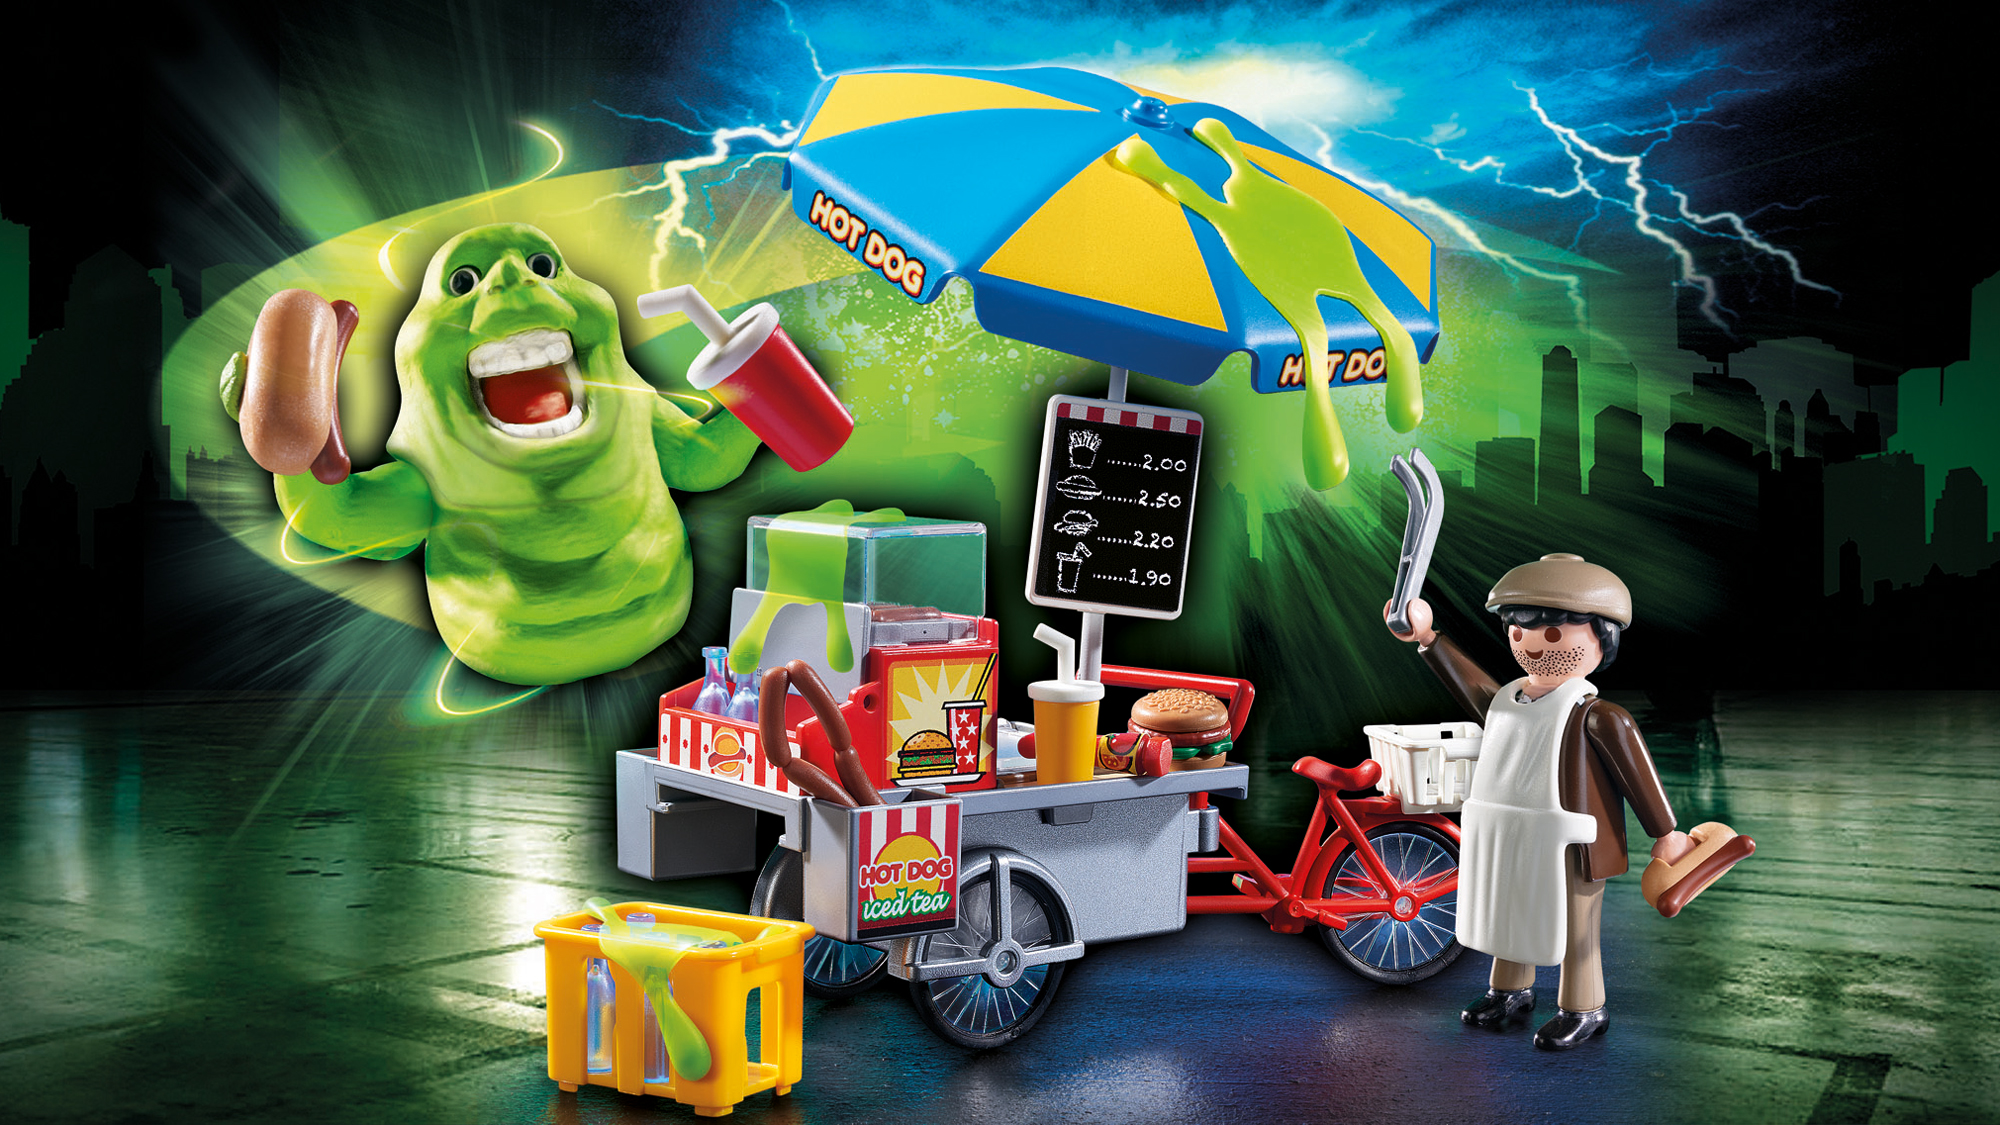 Playmobil’s New Ghostbusters Toys Are So Great You’ll Wish You Had A Childhood Do-Over